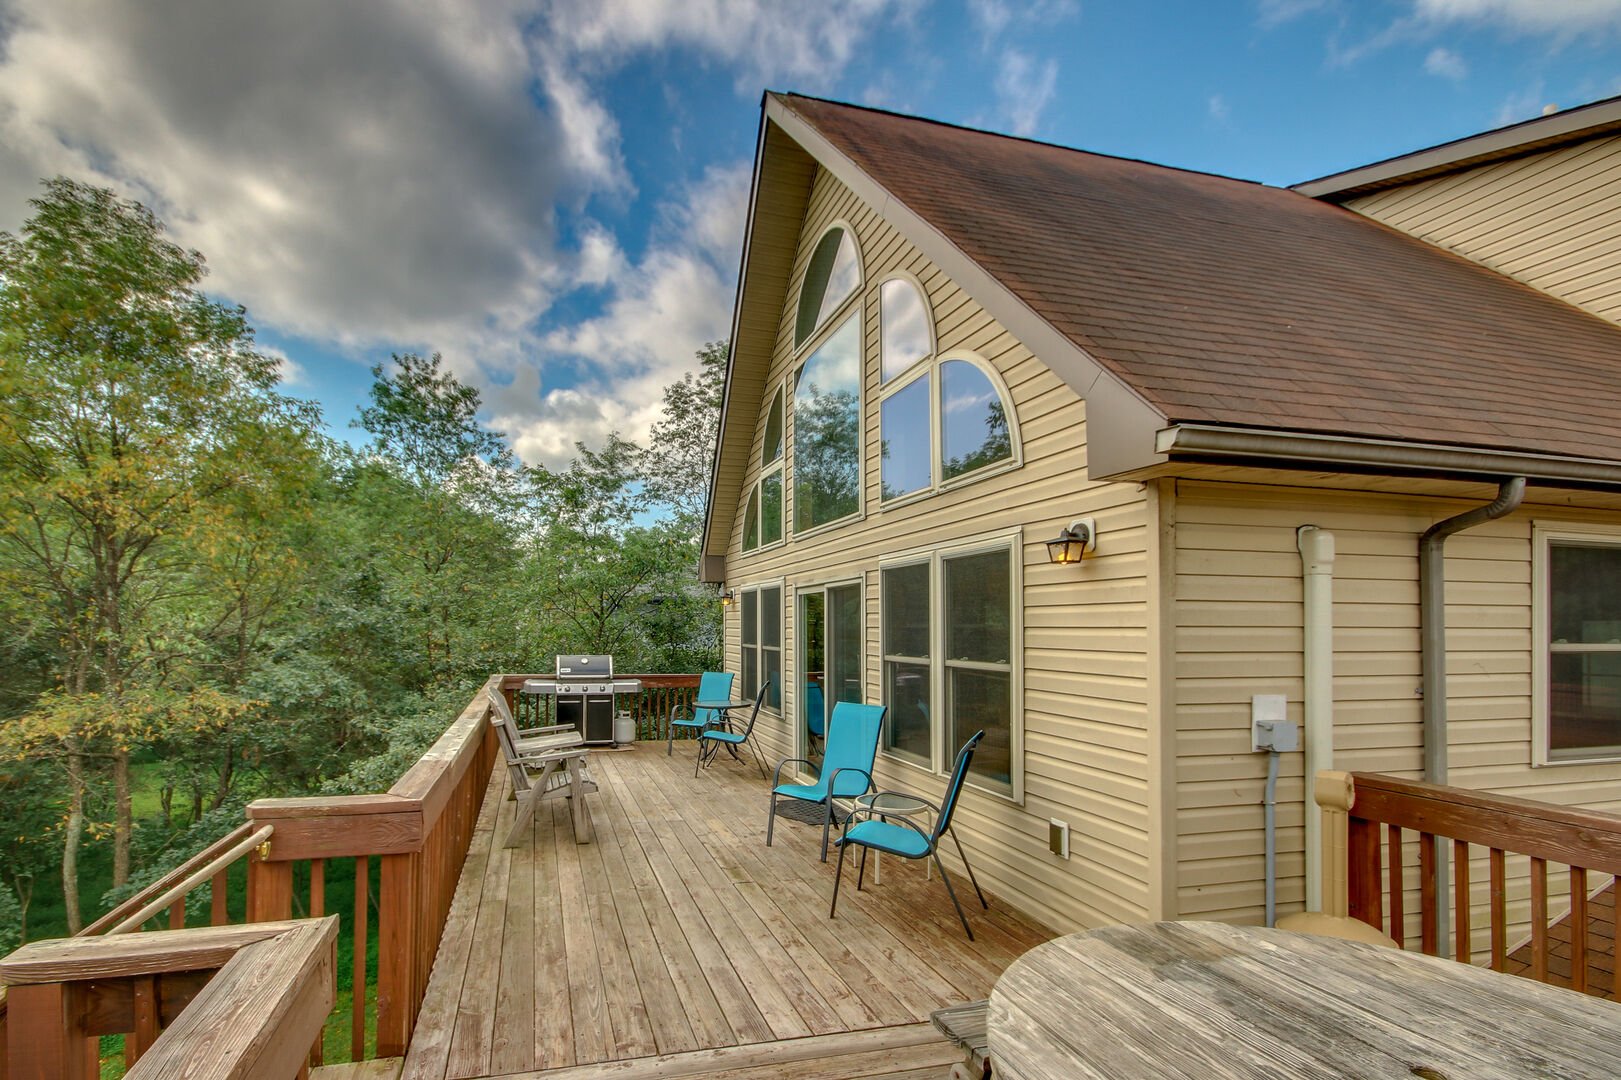 Upstairs Deck, Patio Chairs, and Grill of our Towamensing Trails Vacation Rental.